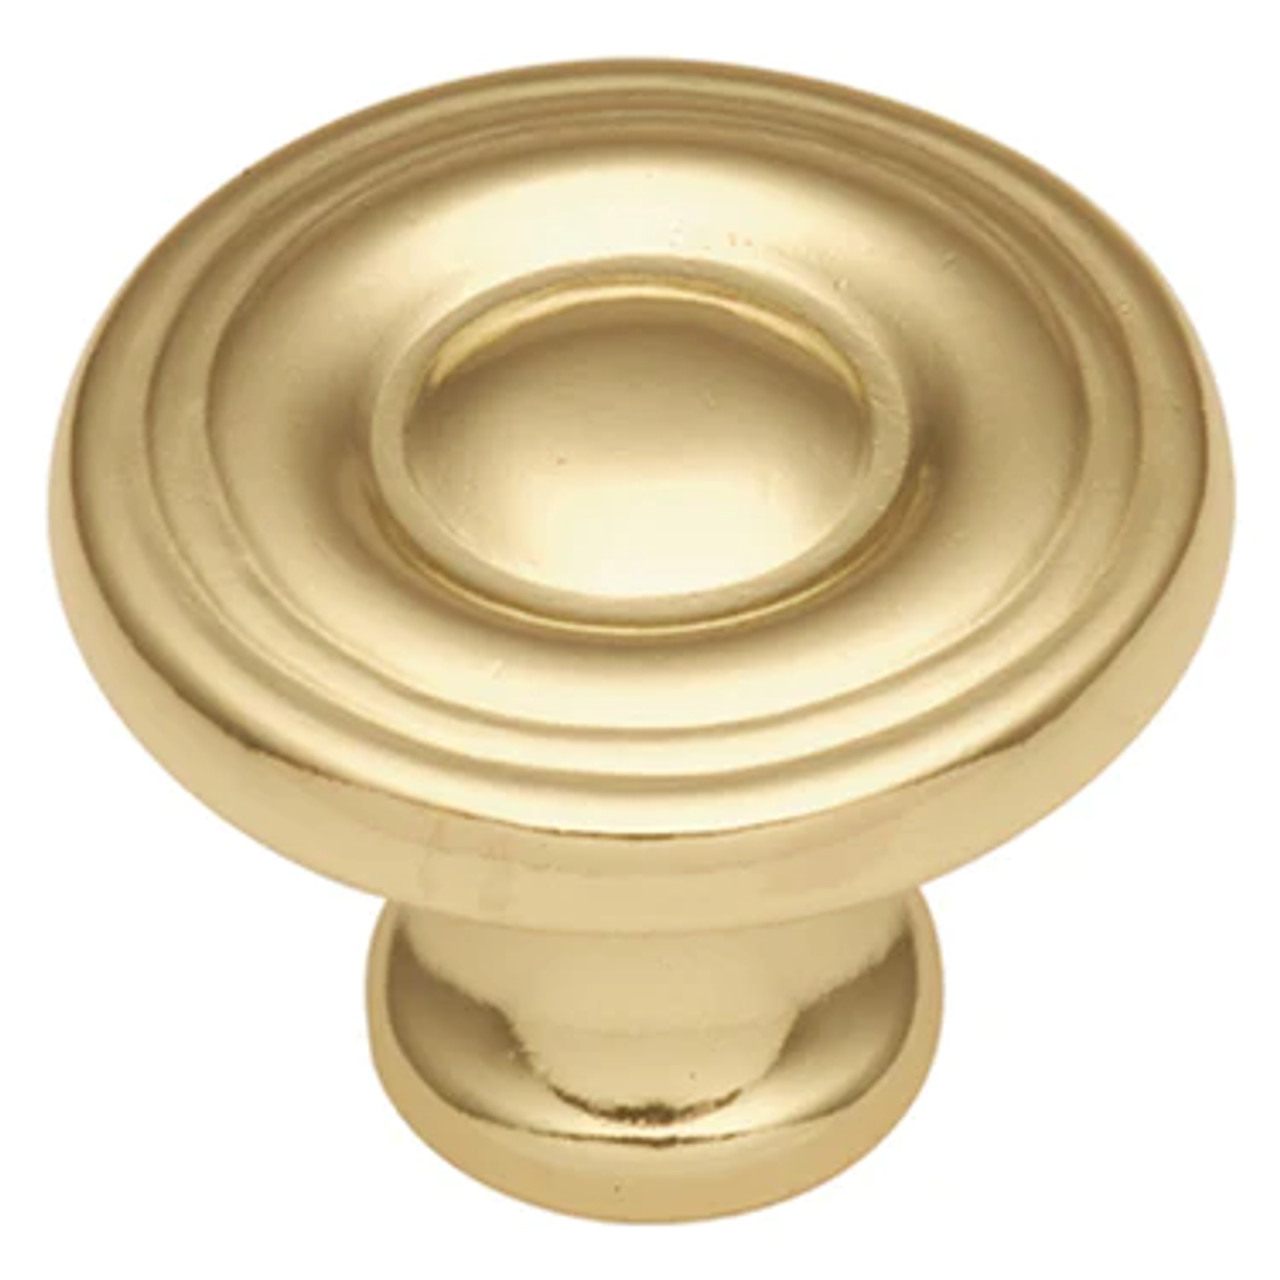 Hickory Hardware 1-3/16"(30MM) CONQUEST CABINET KNOB